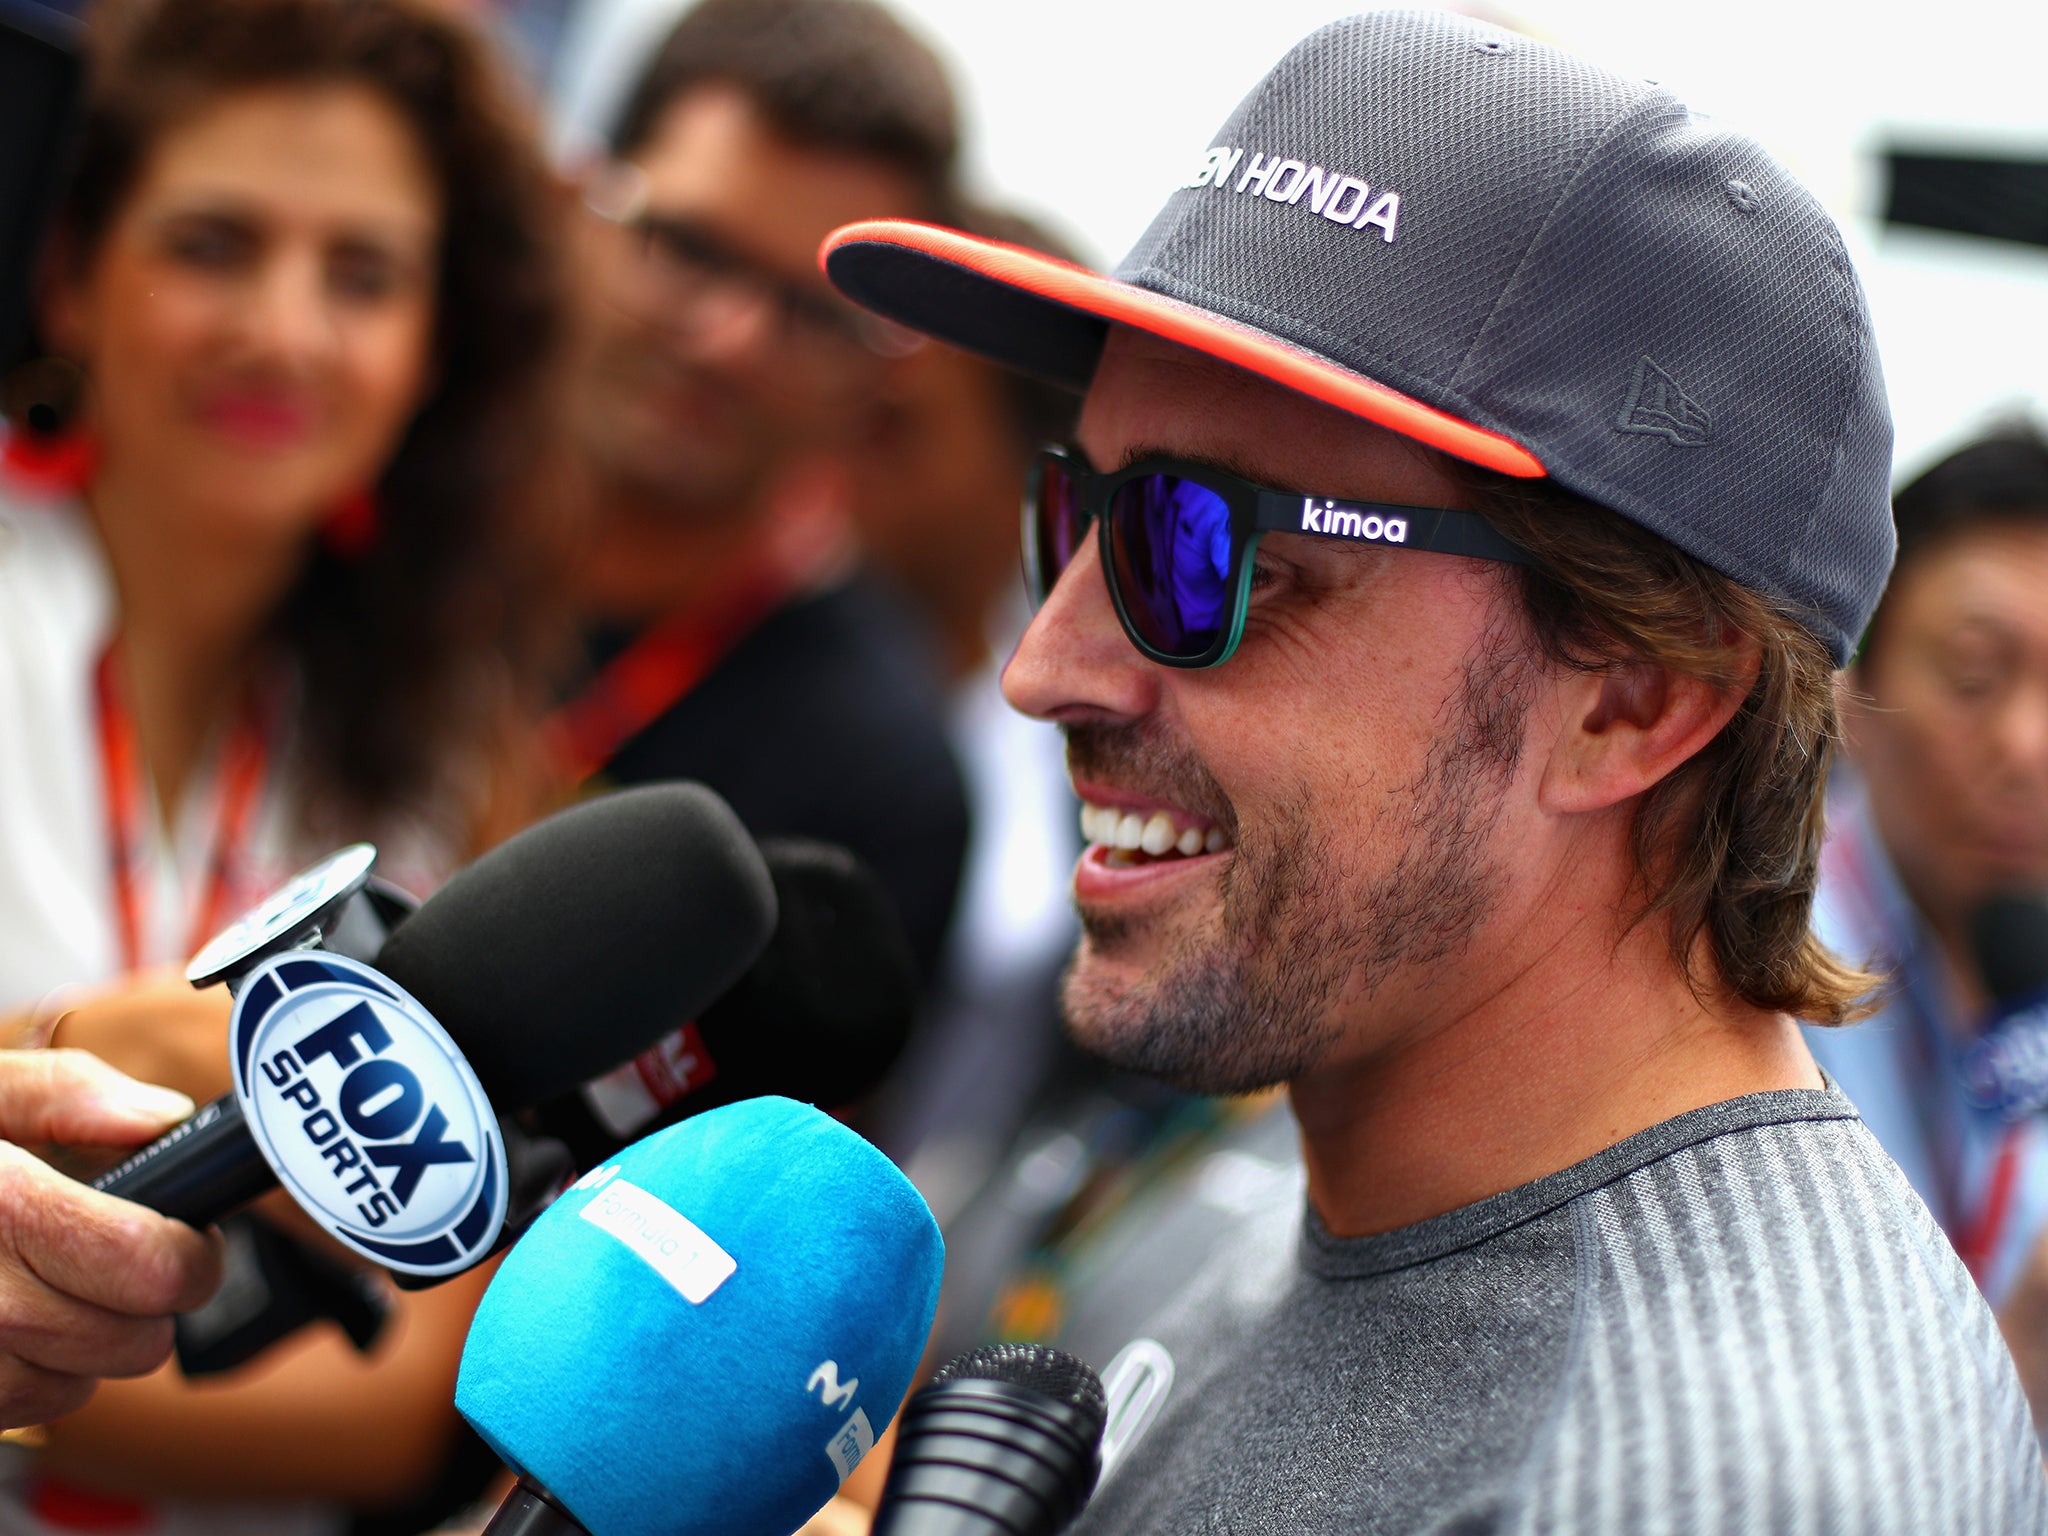 &#13;
Alonso competed in last year's Indy 500 &#13;